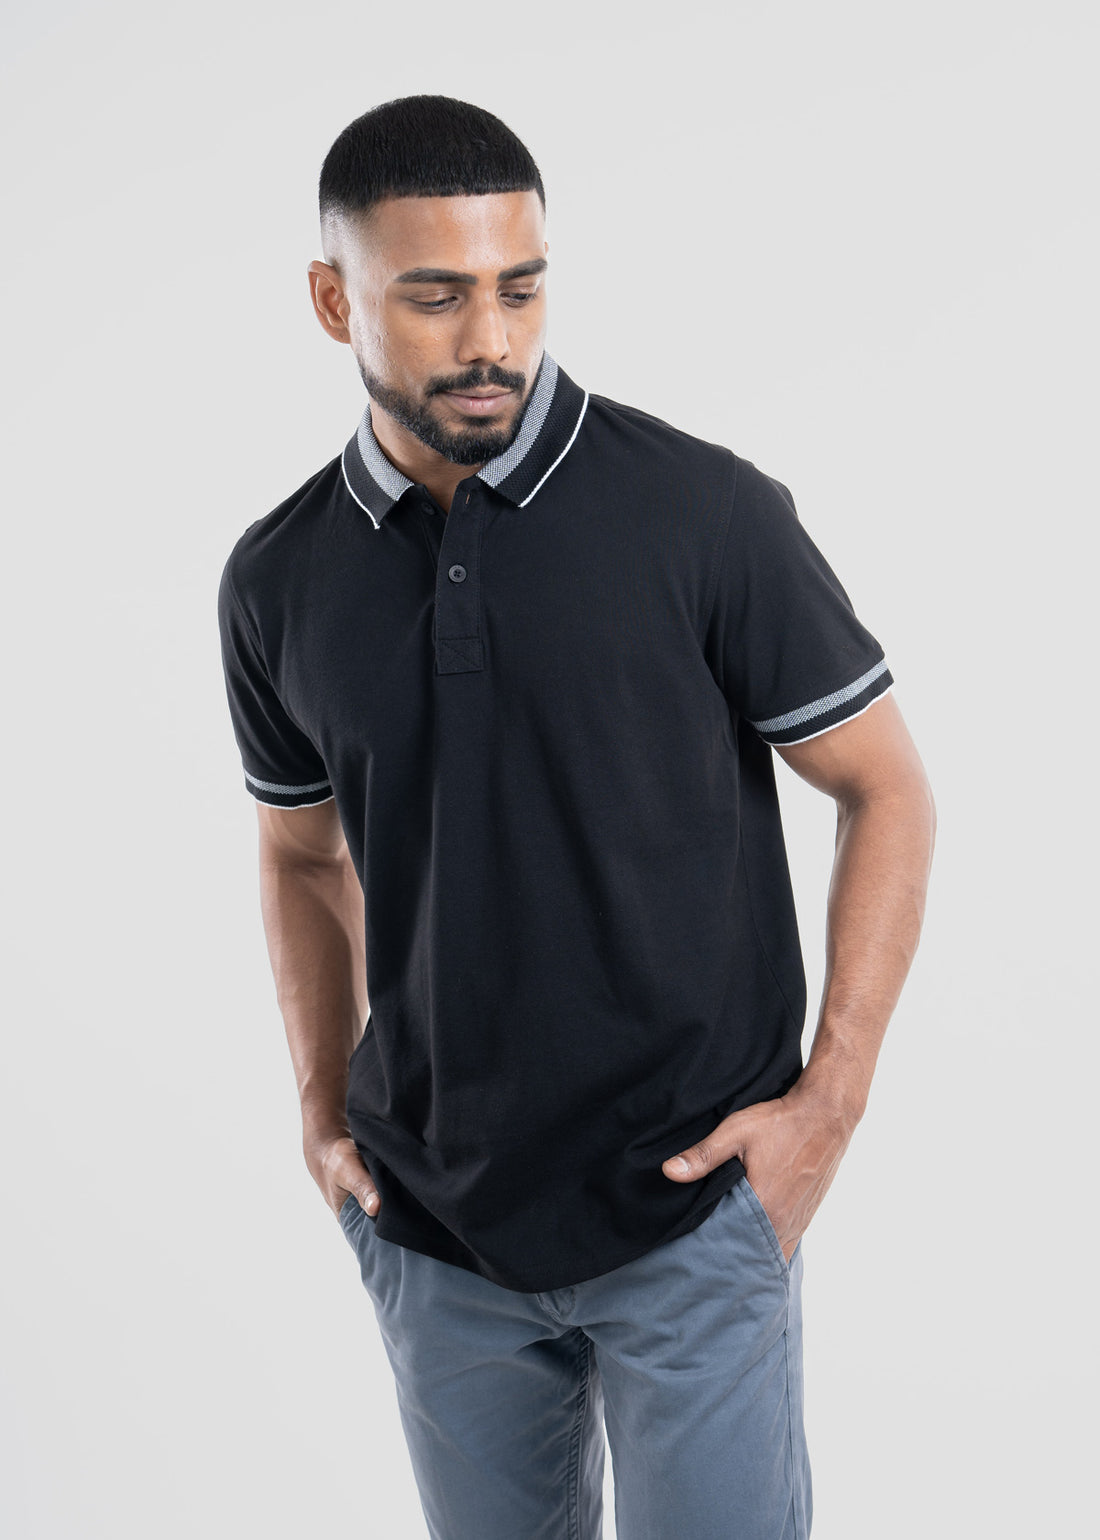 LCY | Stand Up Basics Textured Collar-Cuff Polo - LCY